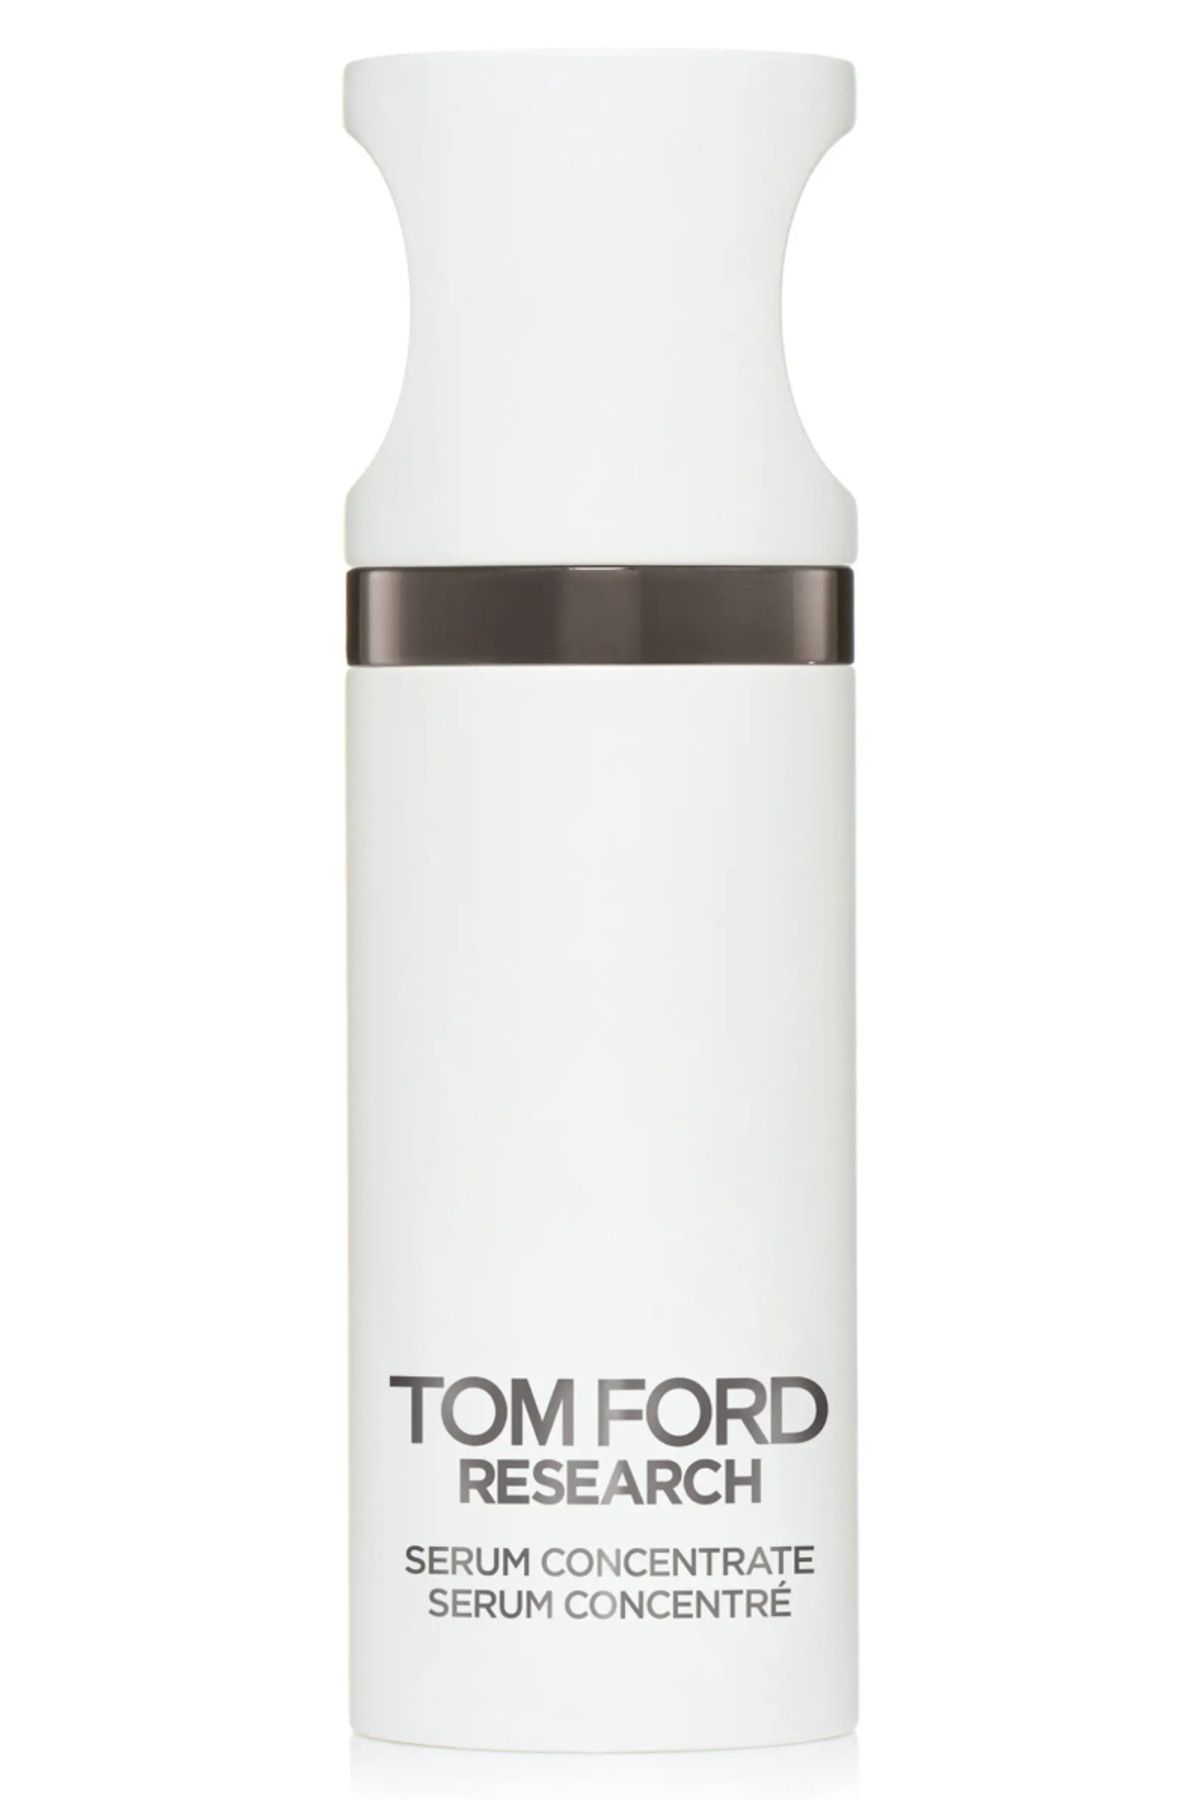 Tom Ford Research Serum Concentrate 20 Ml